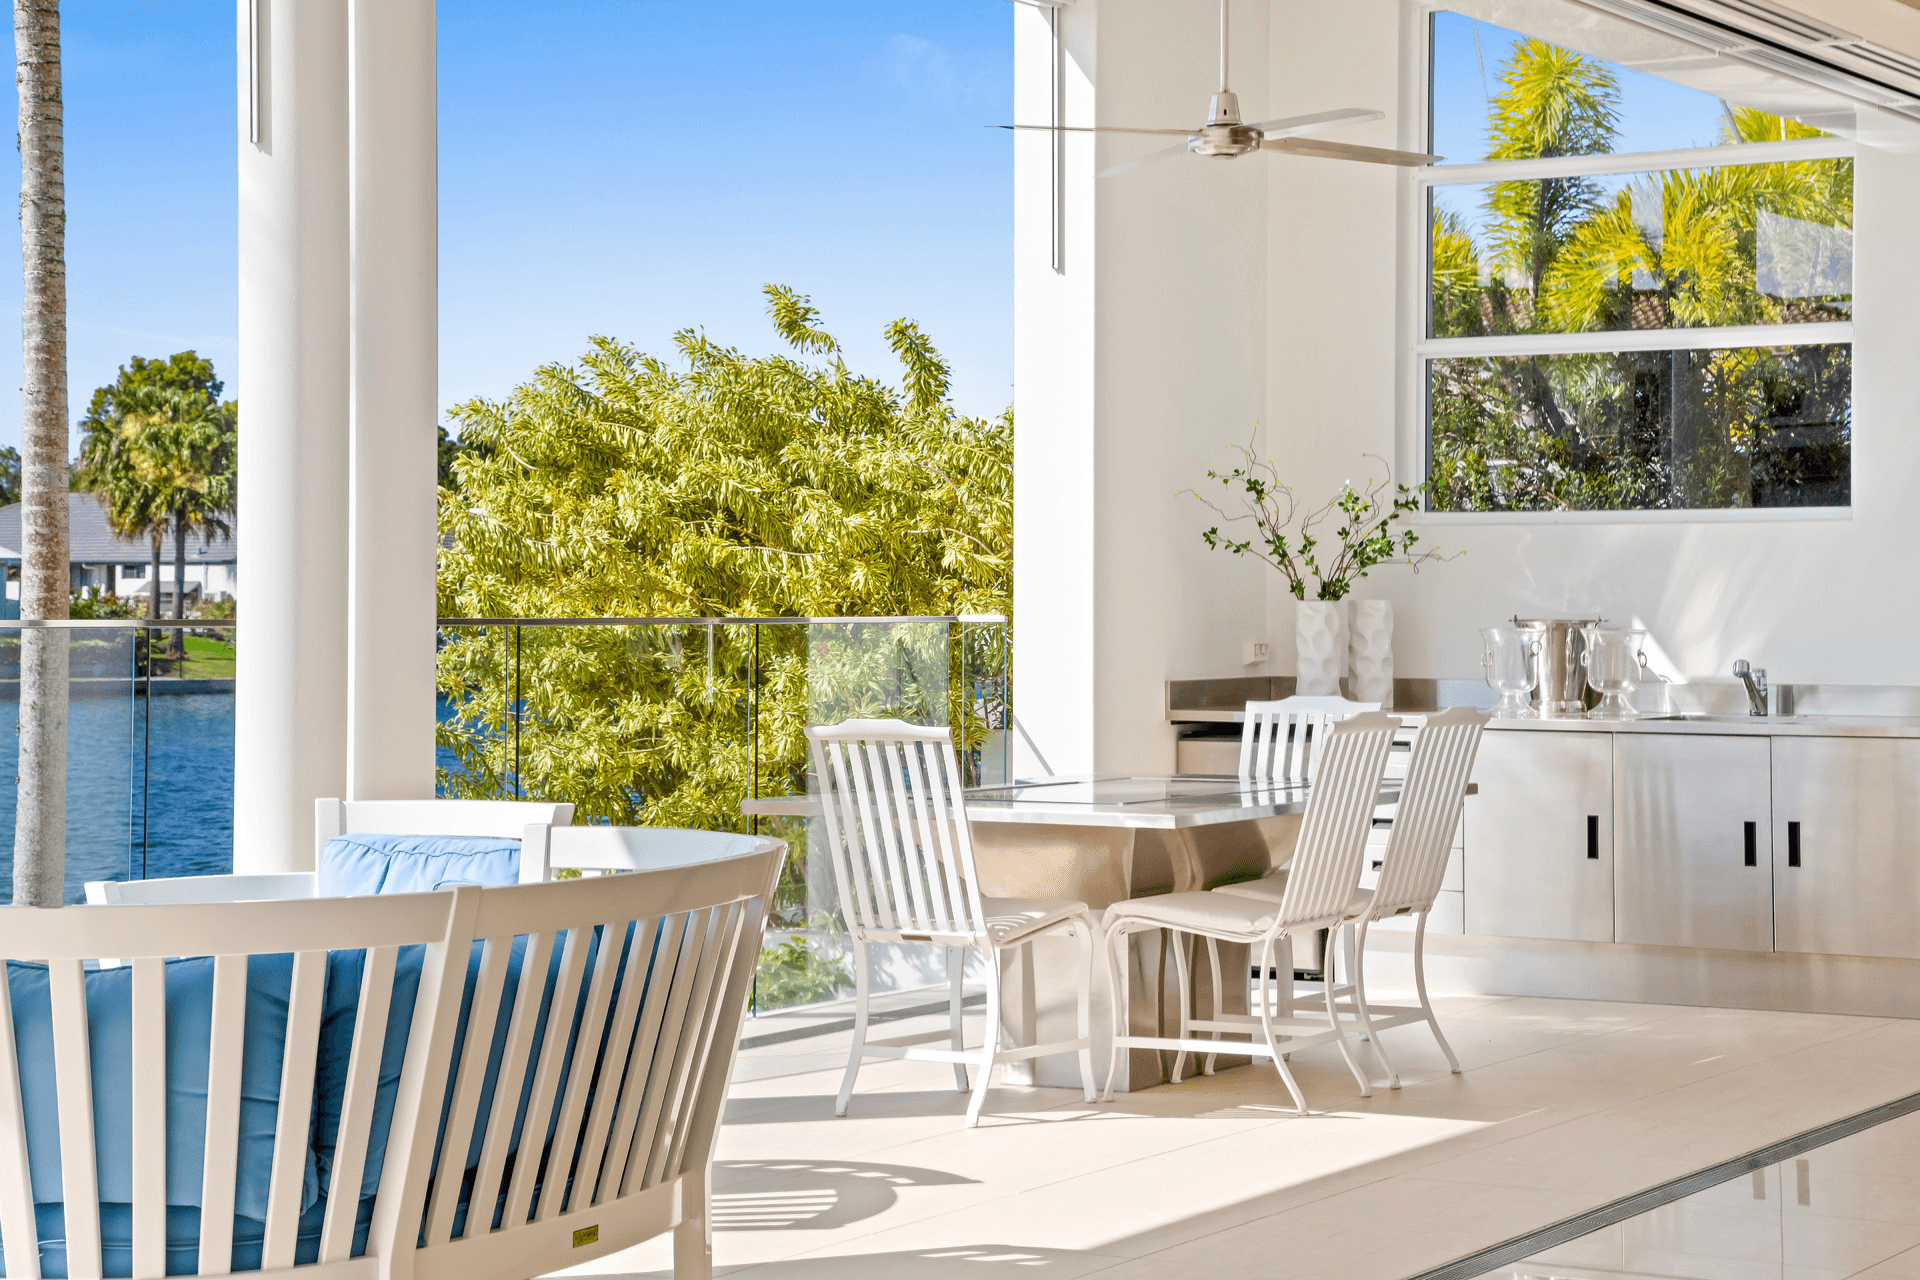 32-36 The Anchorage, Noosa Waters, QLD 4566